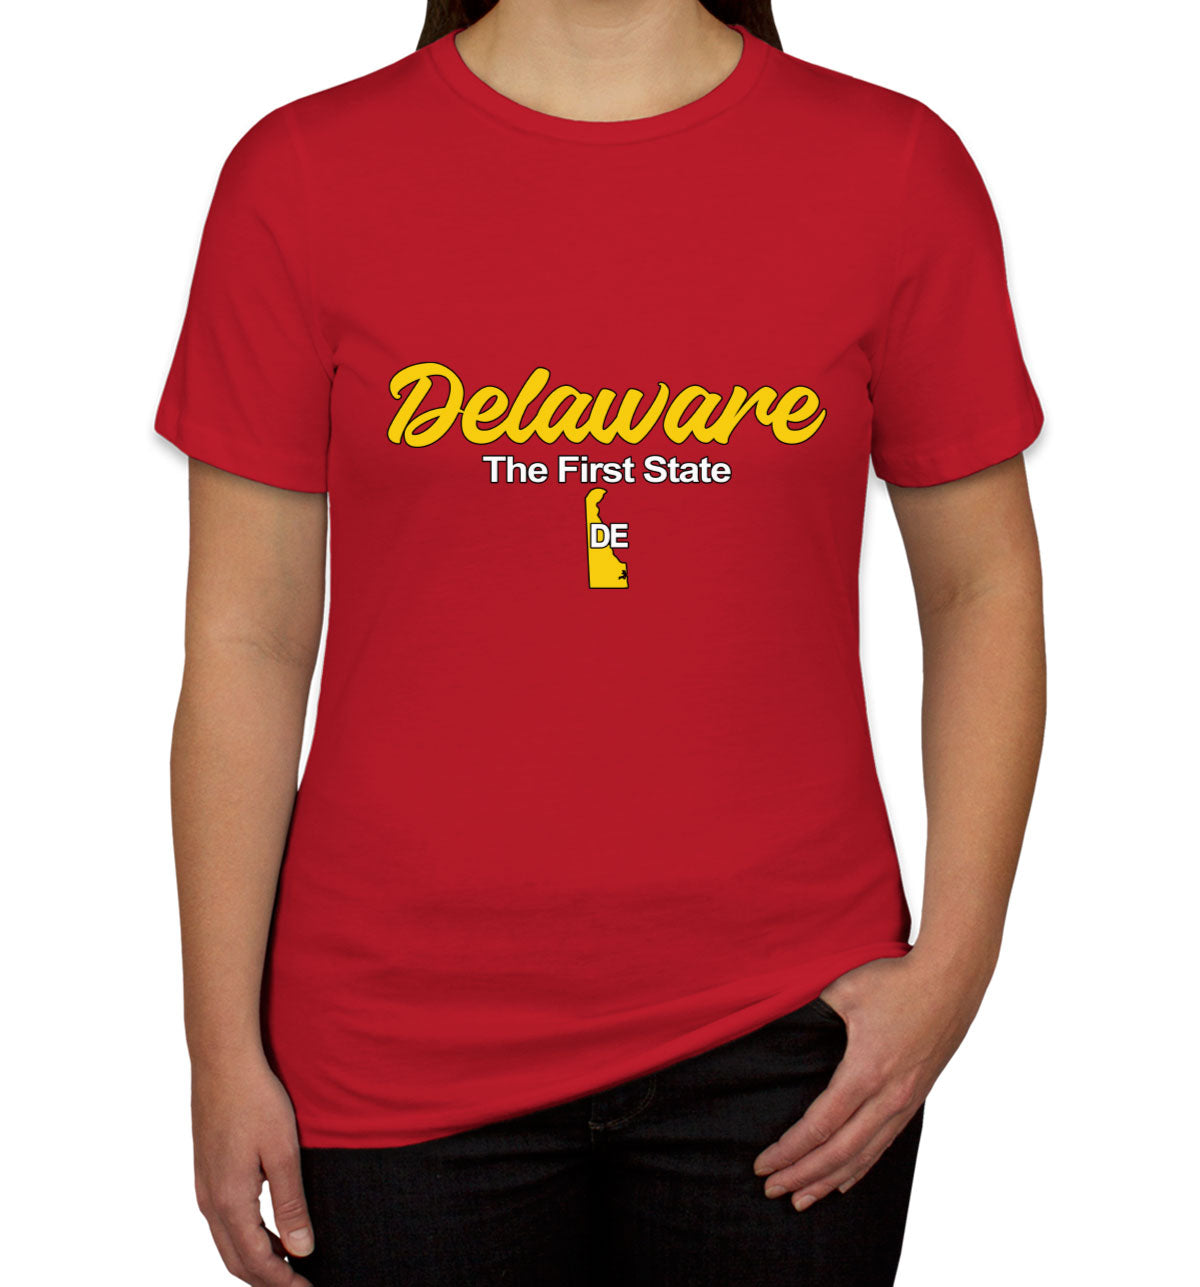 Delaware The First State Women's T-shirt